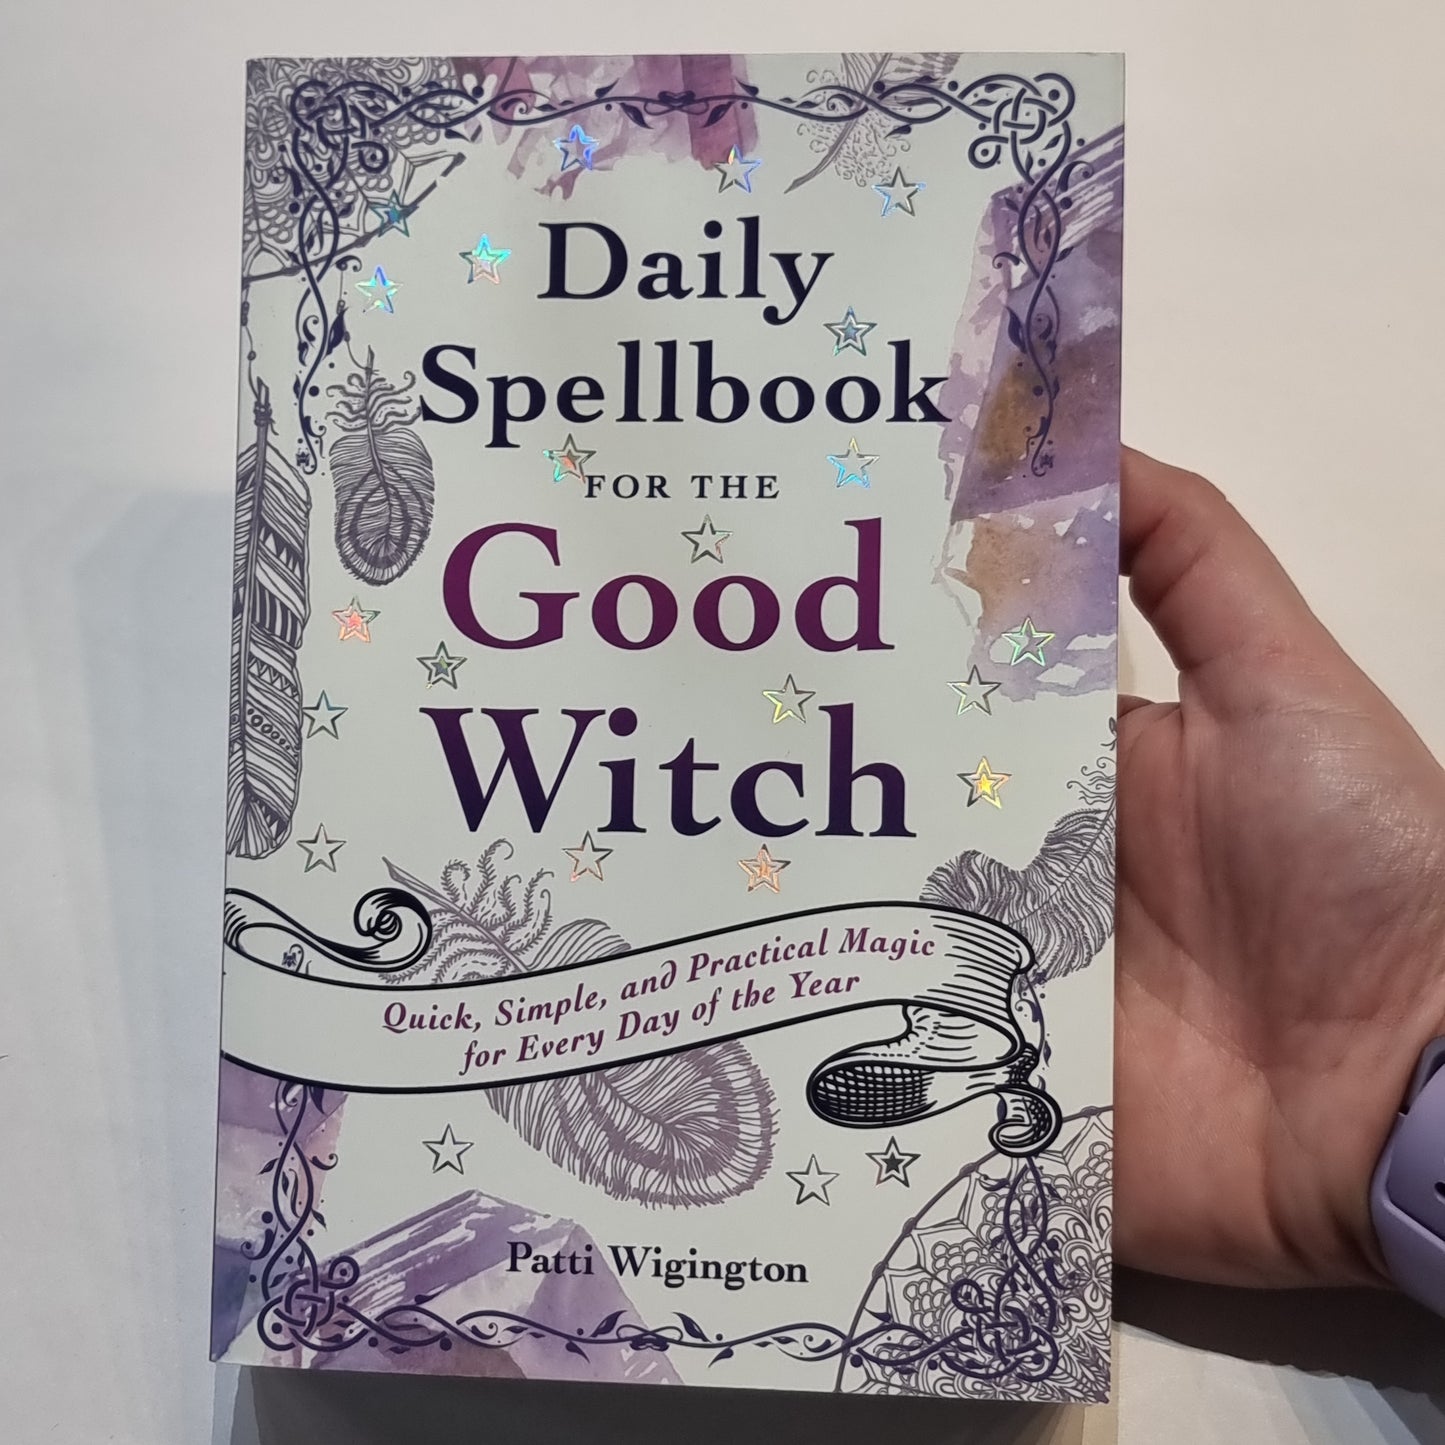 Daily spellbook for the good witch - Rivendell Shop